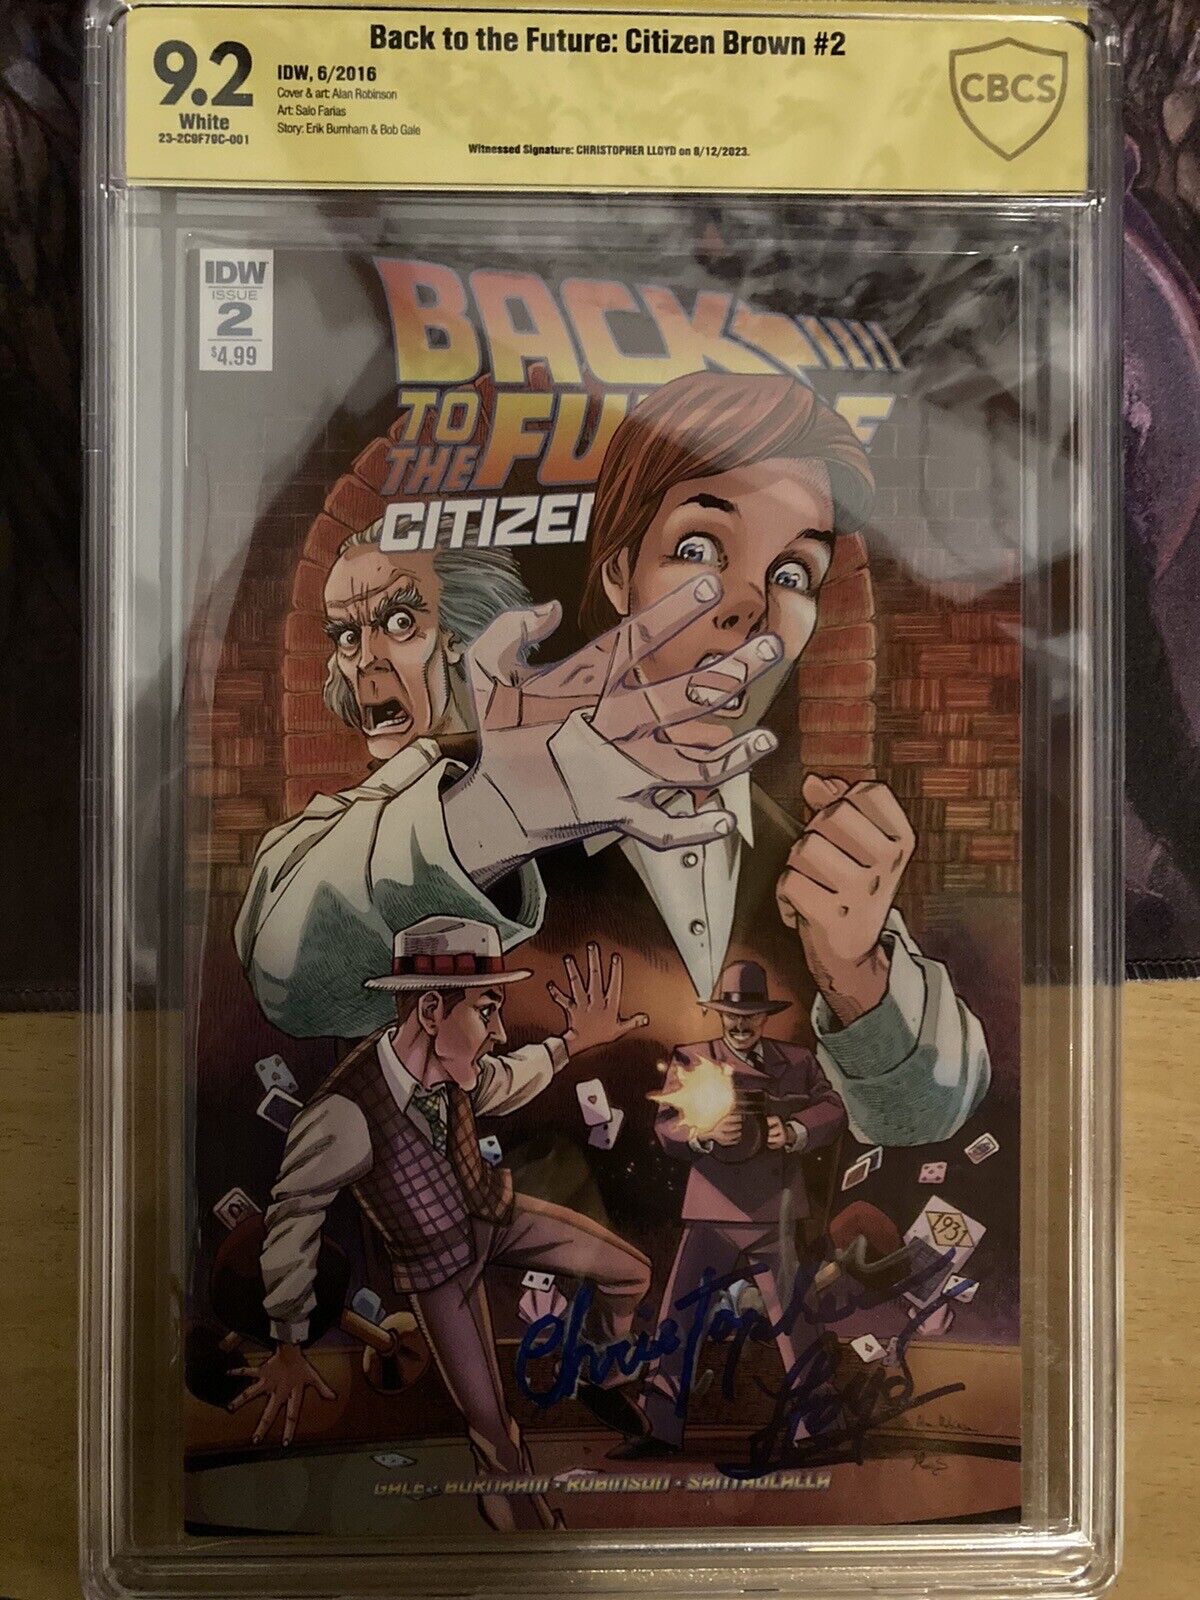 Back To The Future Citizen Brown #2 CBCS 9.2 Witness Signed Christopher Lyyod